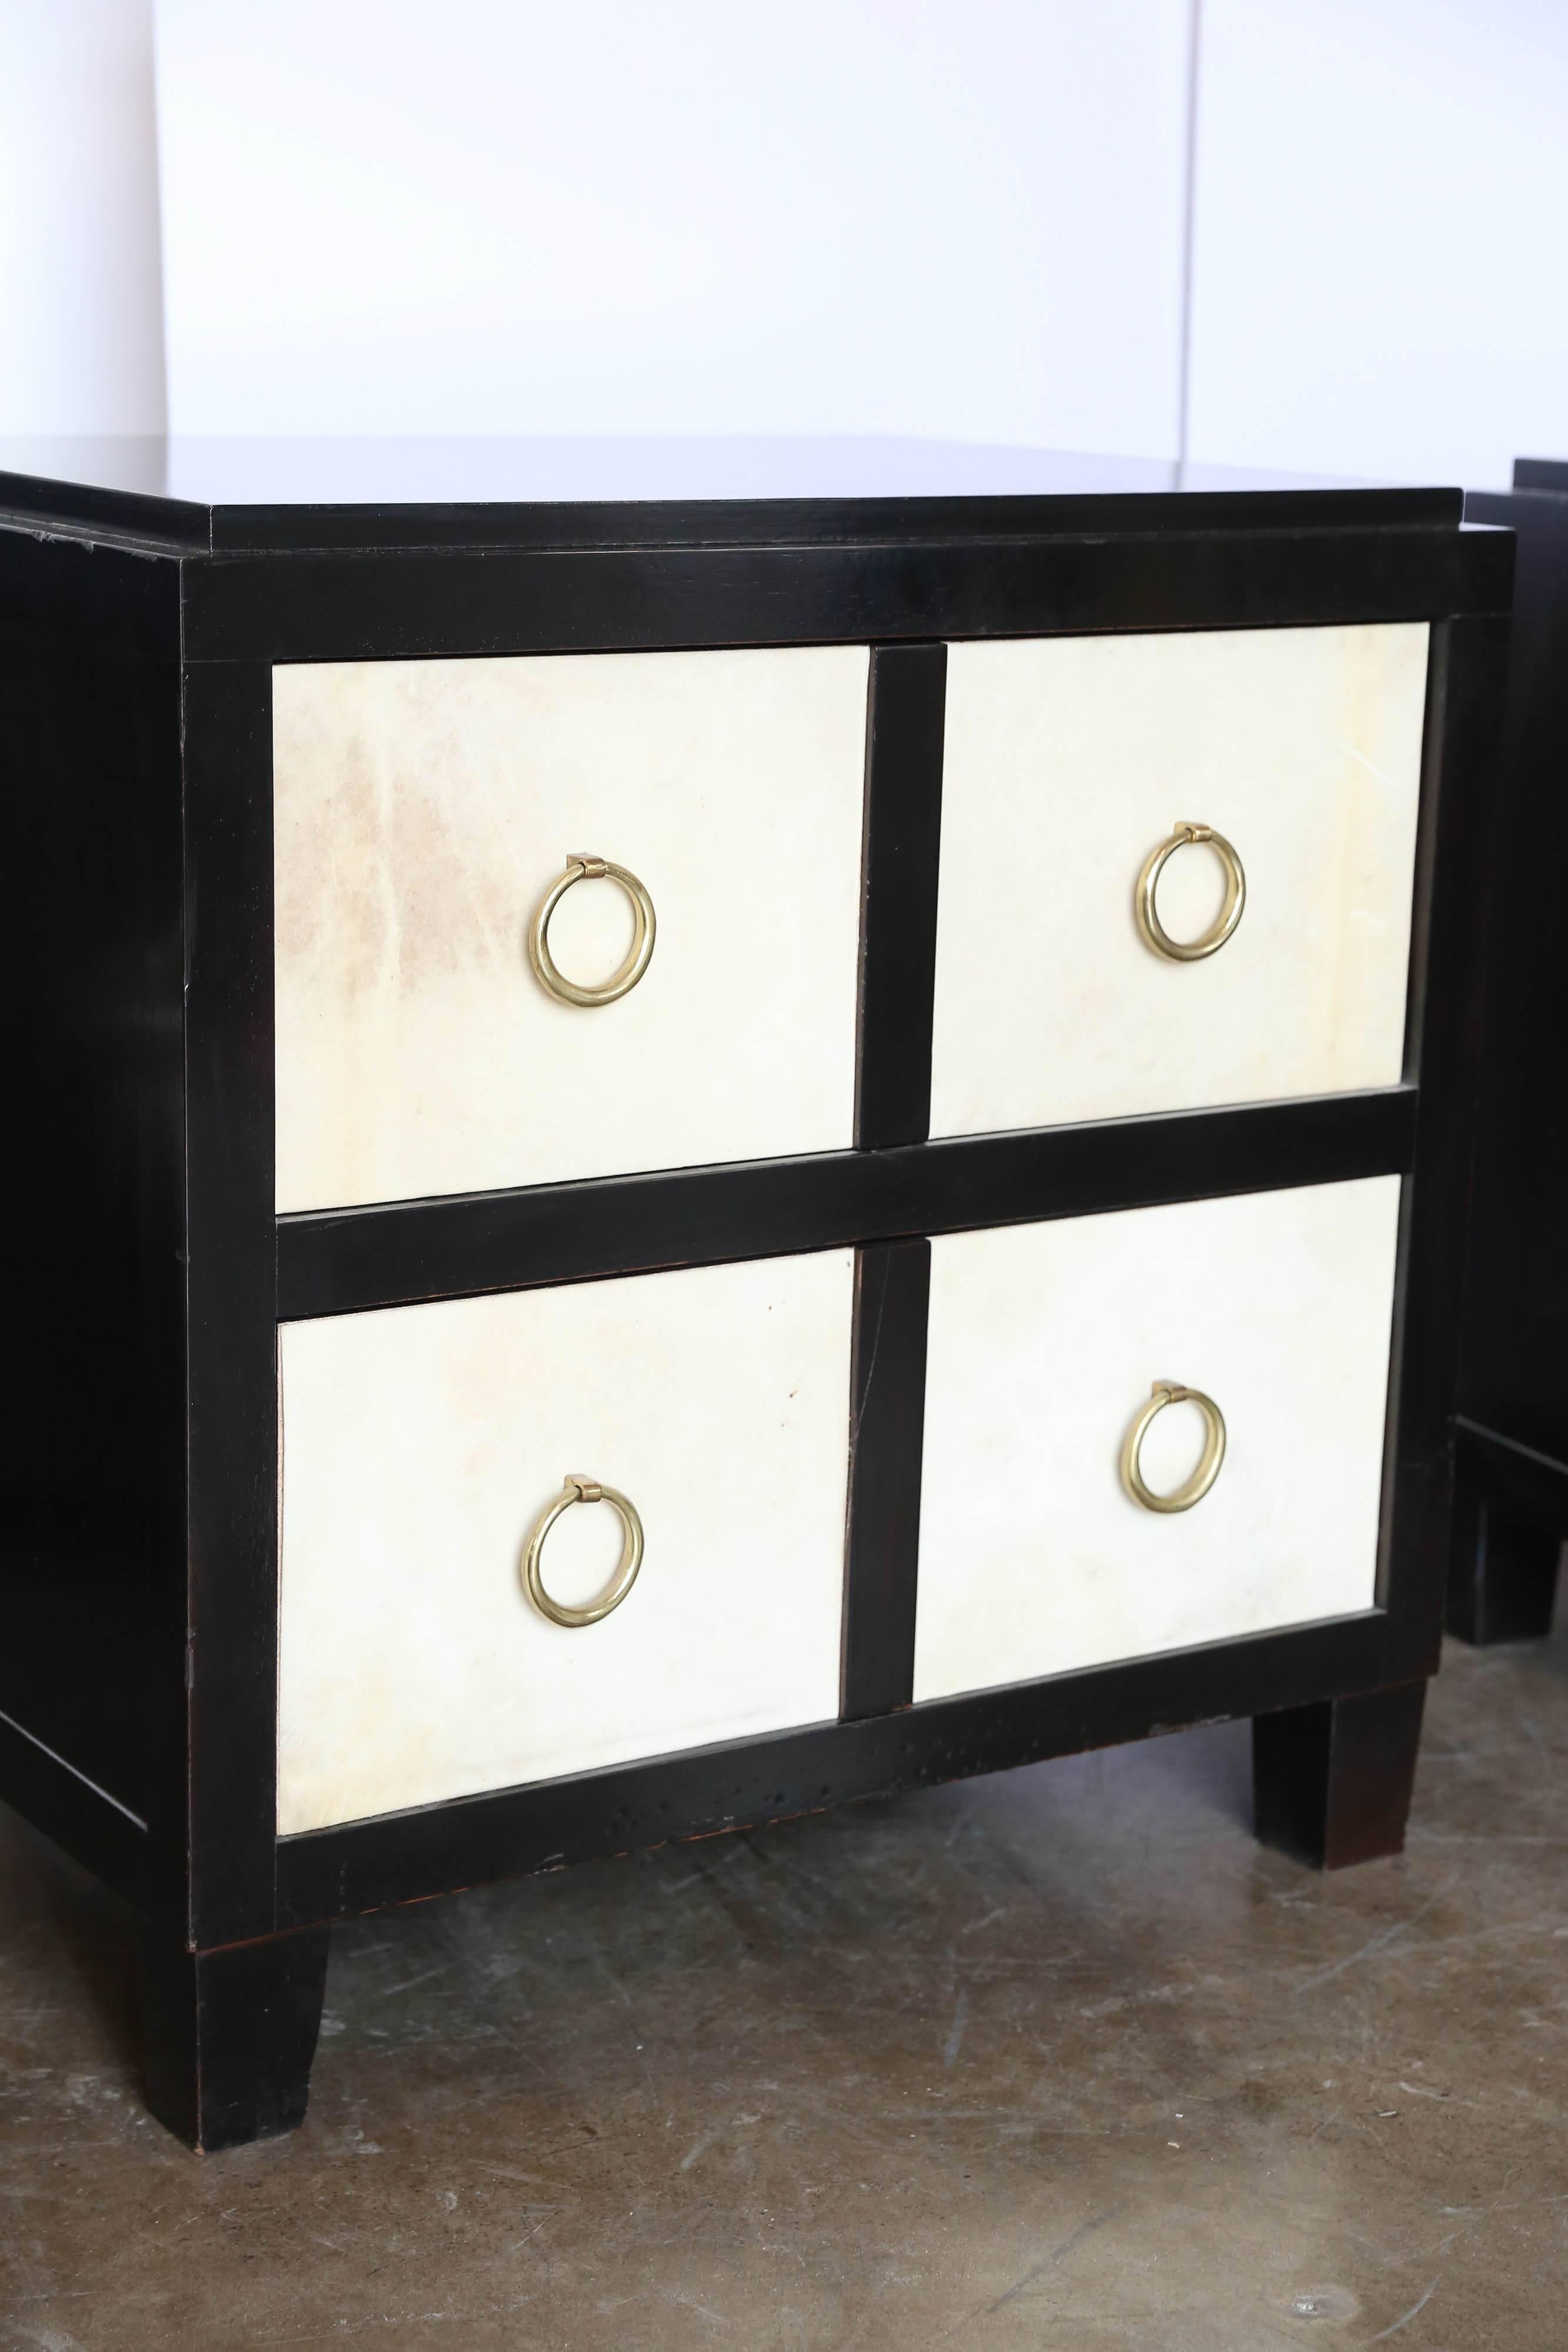 Offered is a pair of gorgeous "French Moderne" style bedside tables of ebonized wood, vellum and brass.  Recalling the work of Jean-Michel Frank, these two-drawer cabinets would add classic high glamour to any bedroom decor.